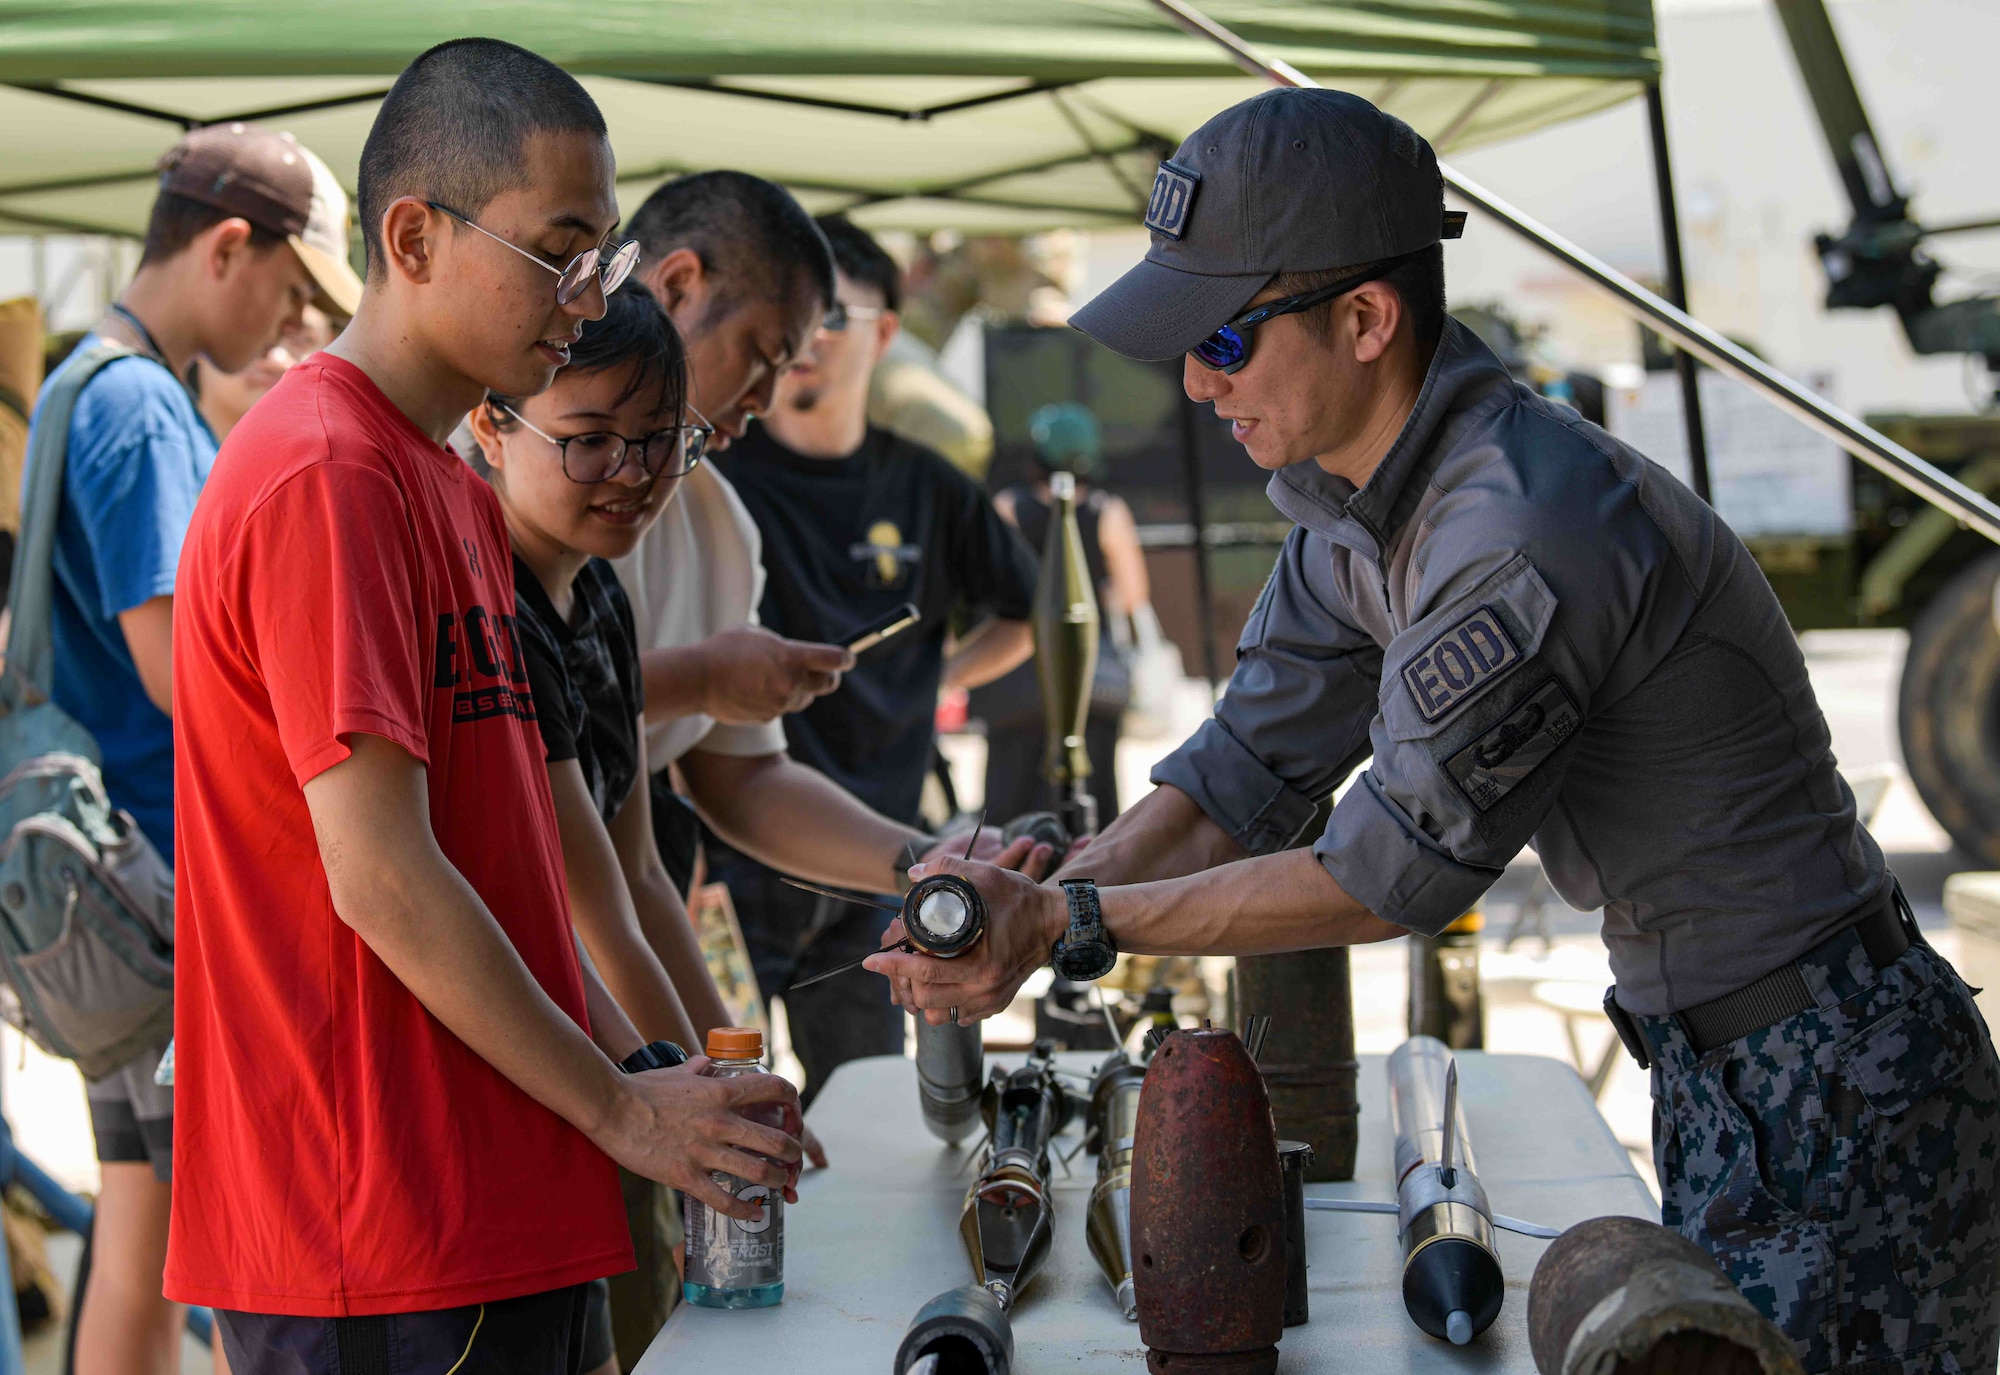 A Japan Air Self Defense Force Airman teaches America Fest attendees about a simulated ordnance.